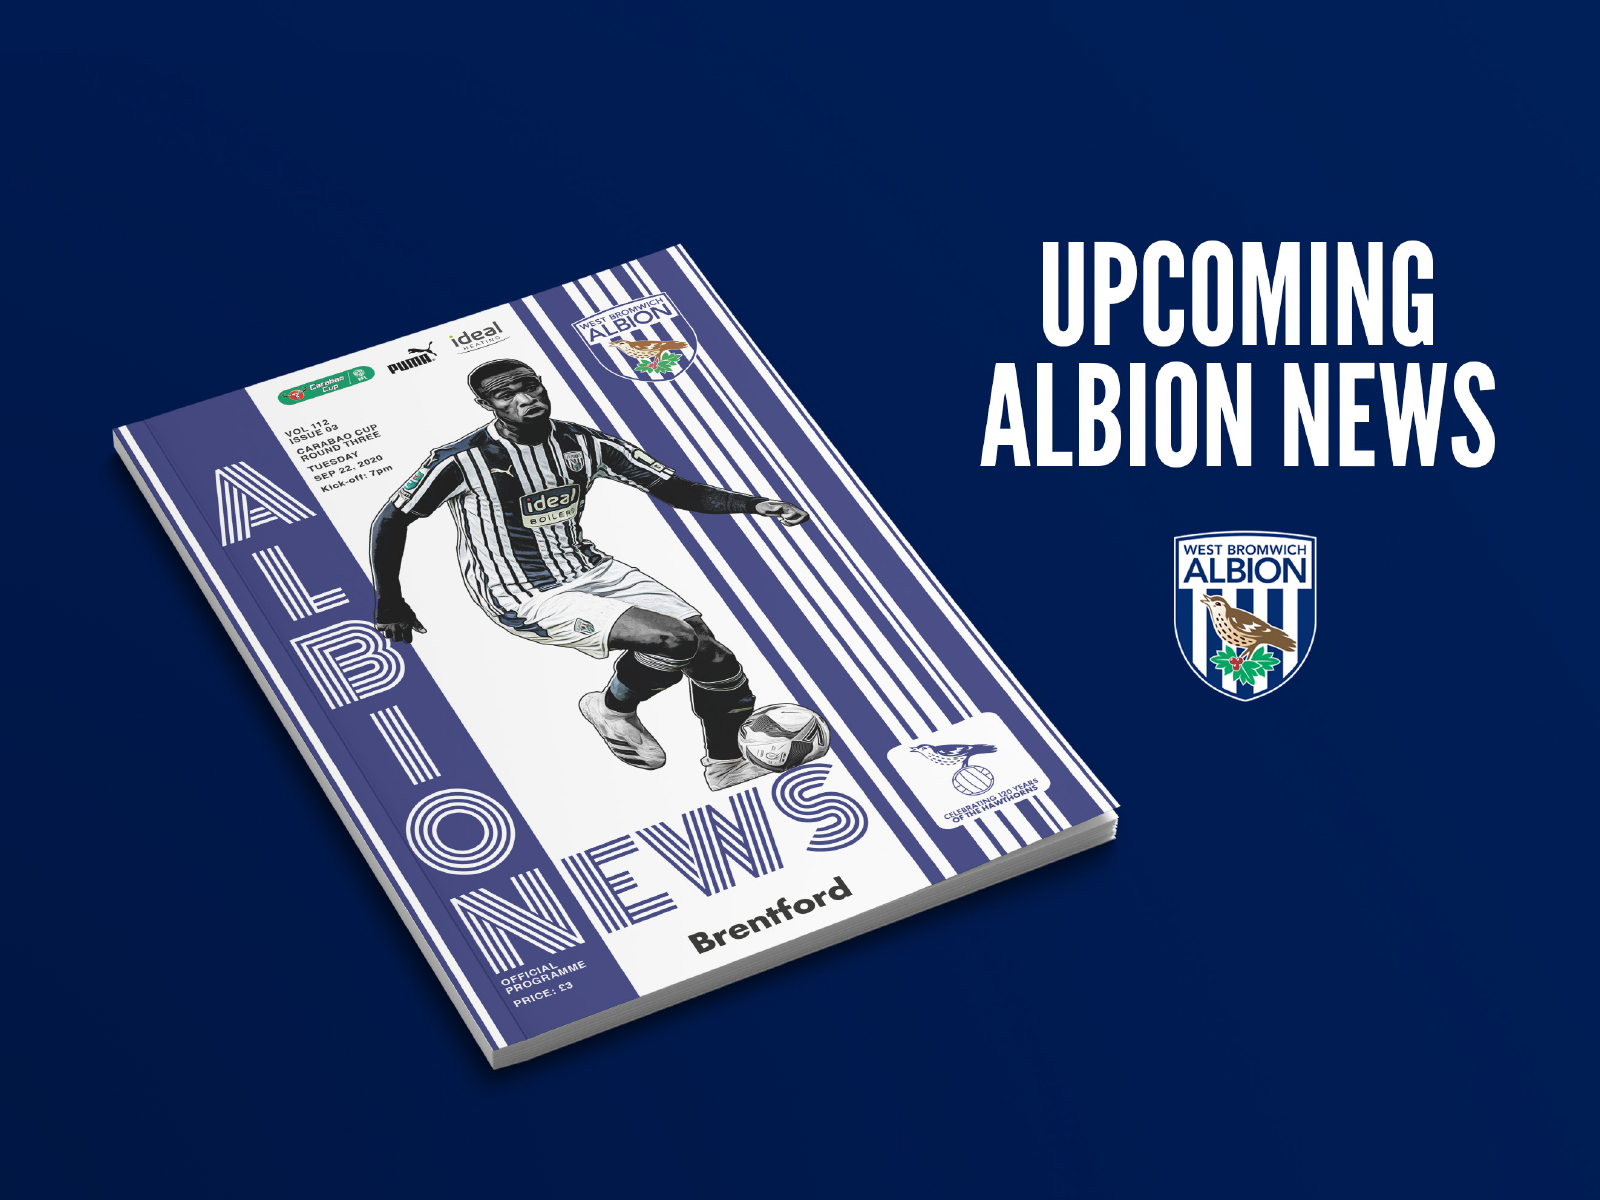 tuesdays-albion-news-features-harper-interview-west-bromwich-albion